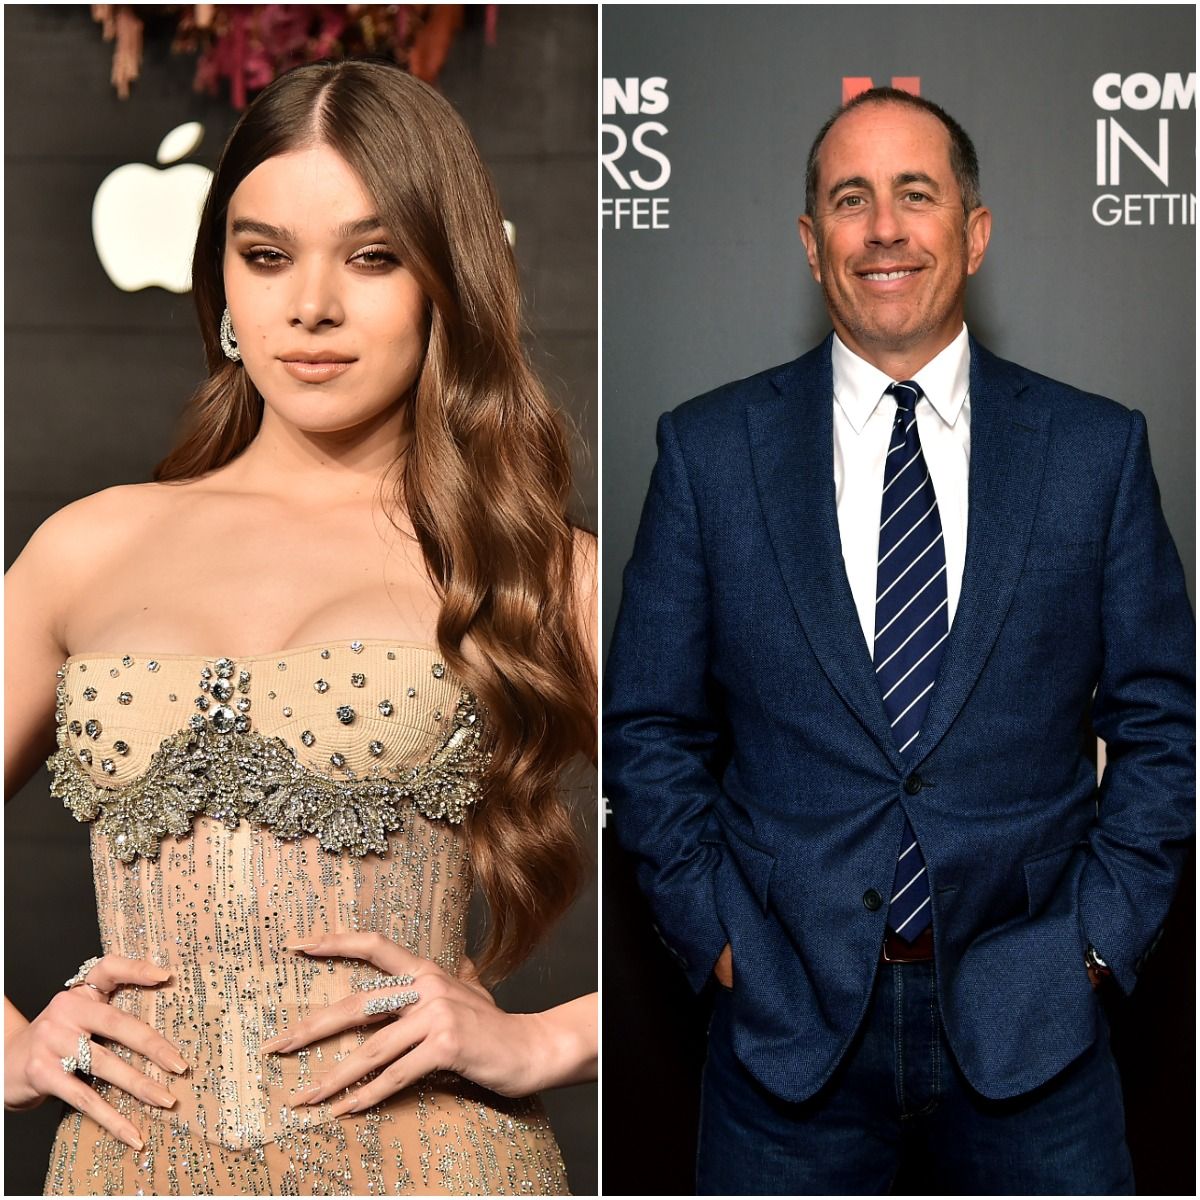 Is actress Hailee Steinfeld Jerry Seinfeld’s Daughter